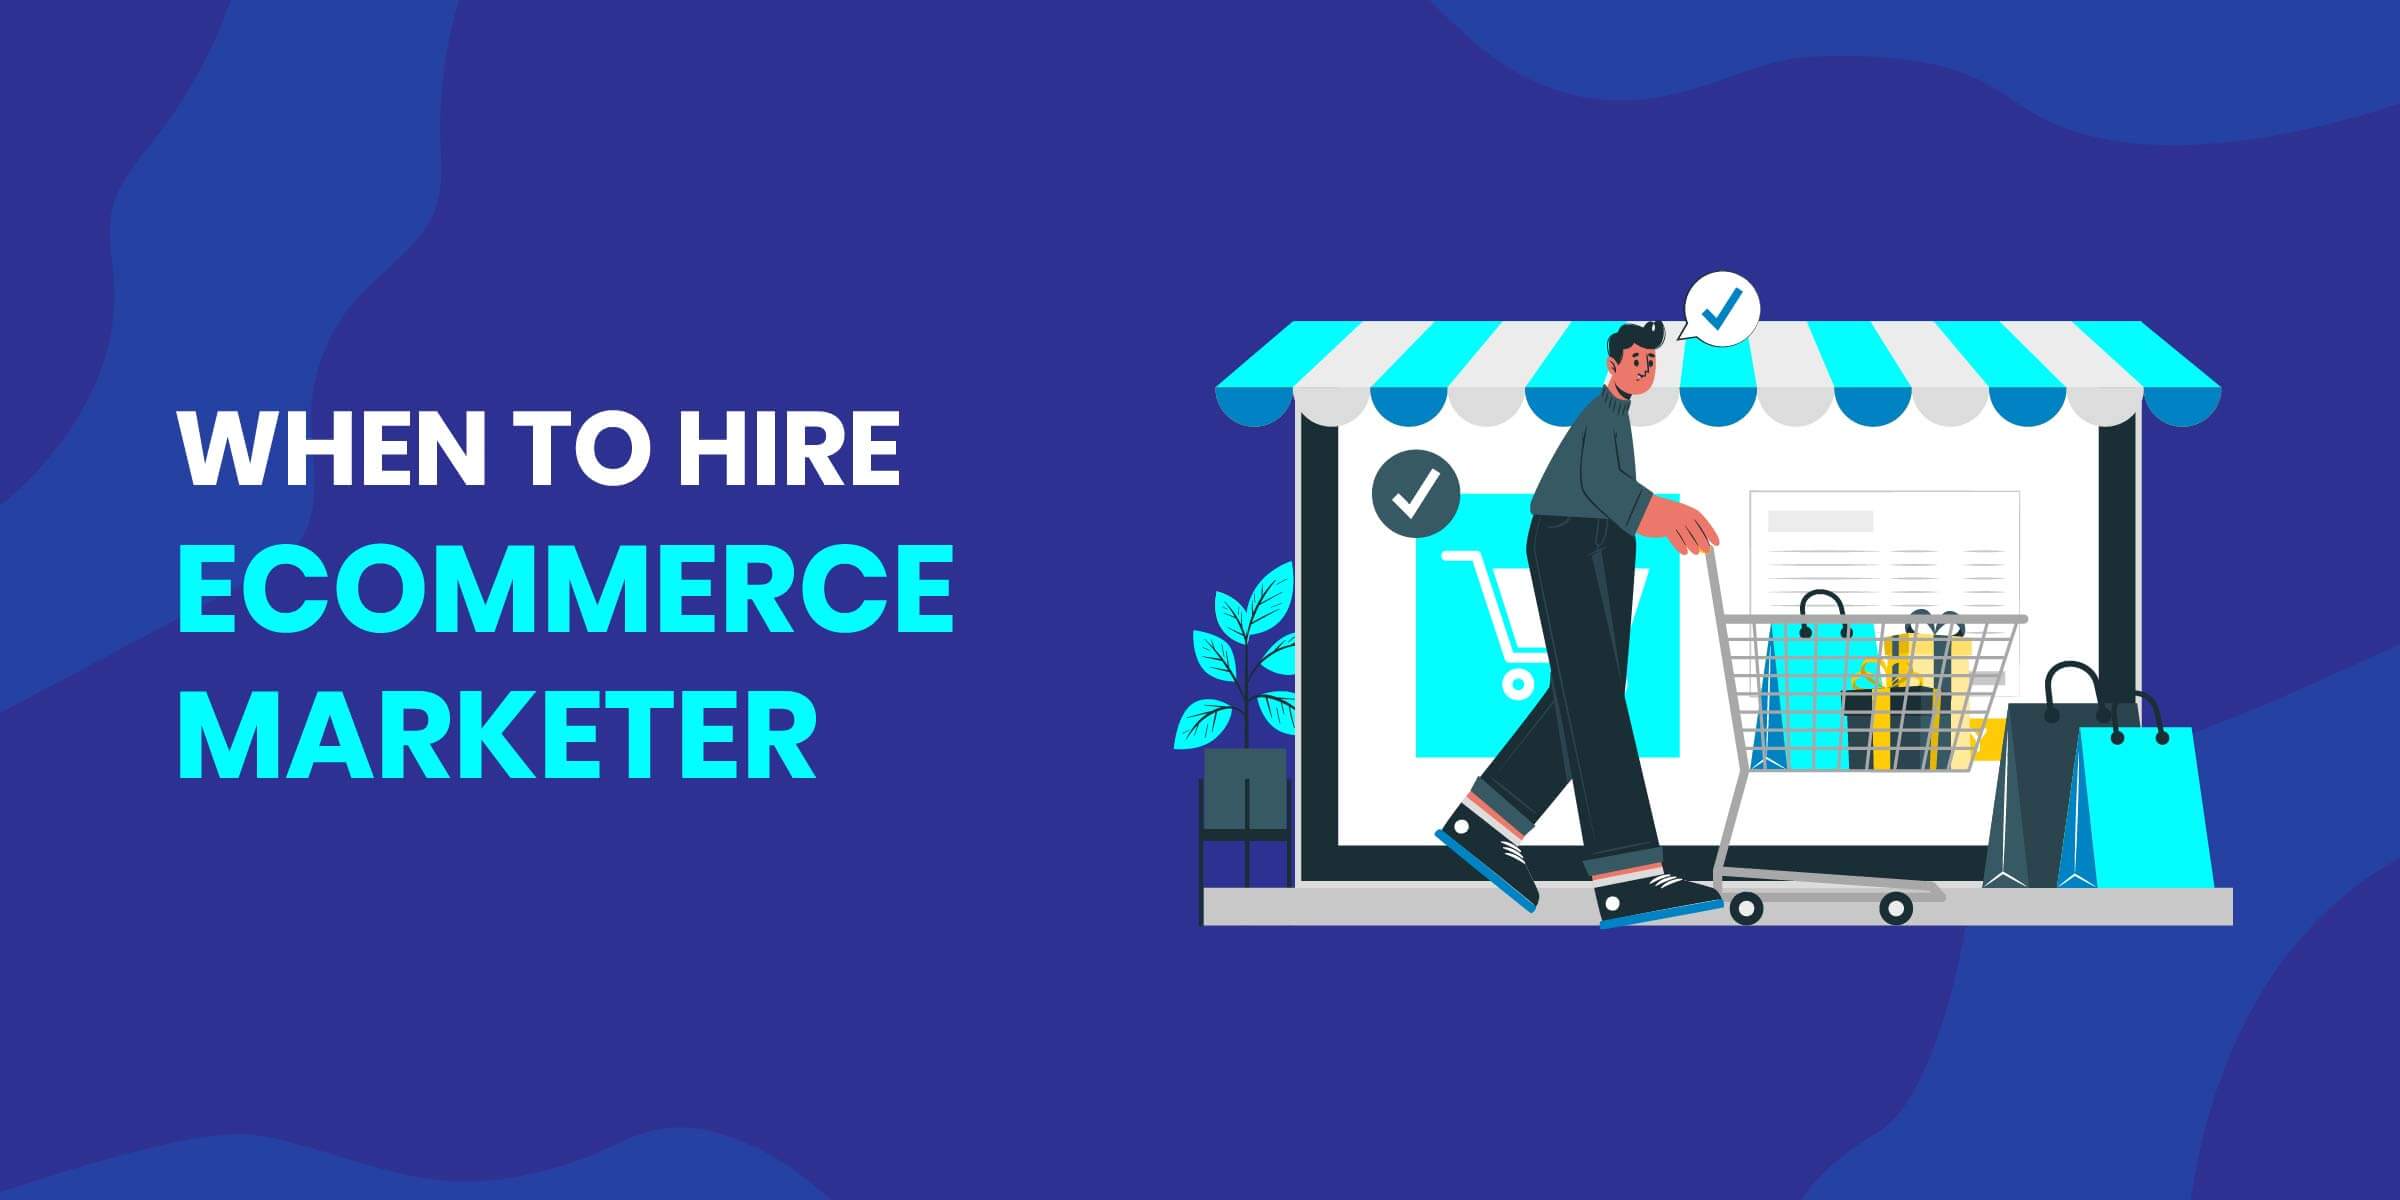 When to Hire eCommerce Marketer